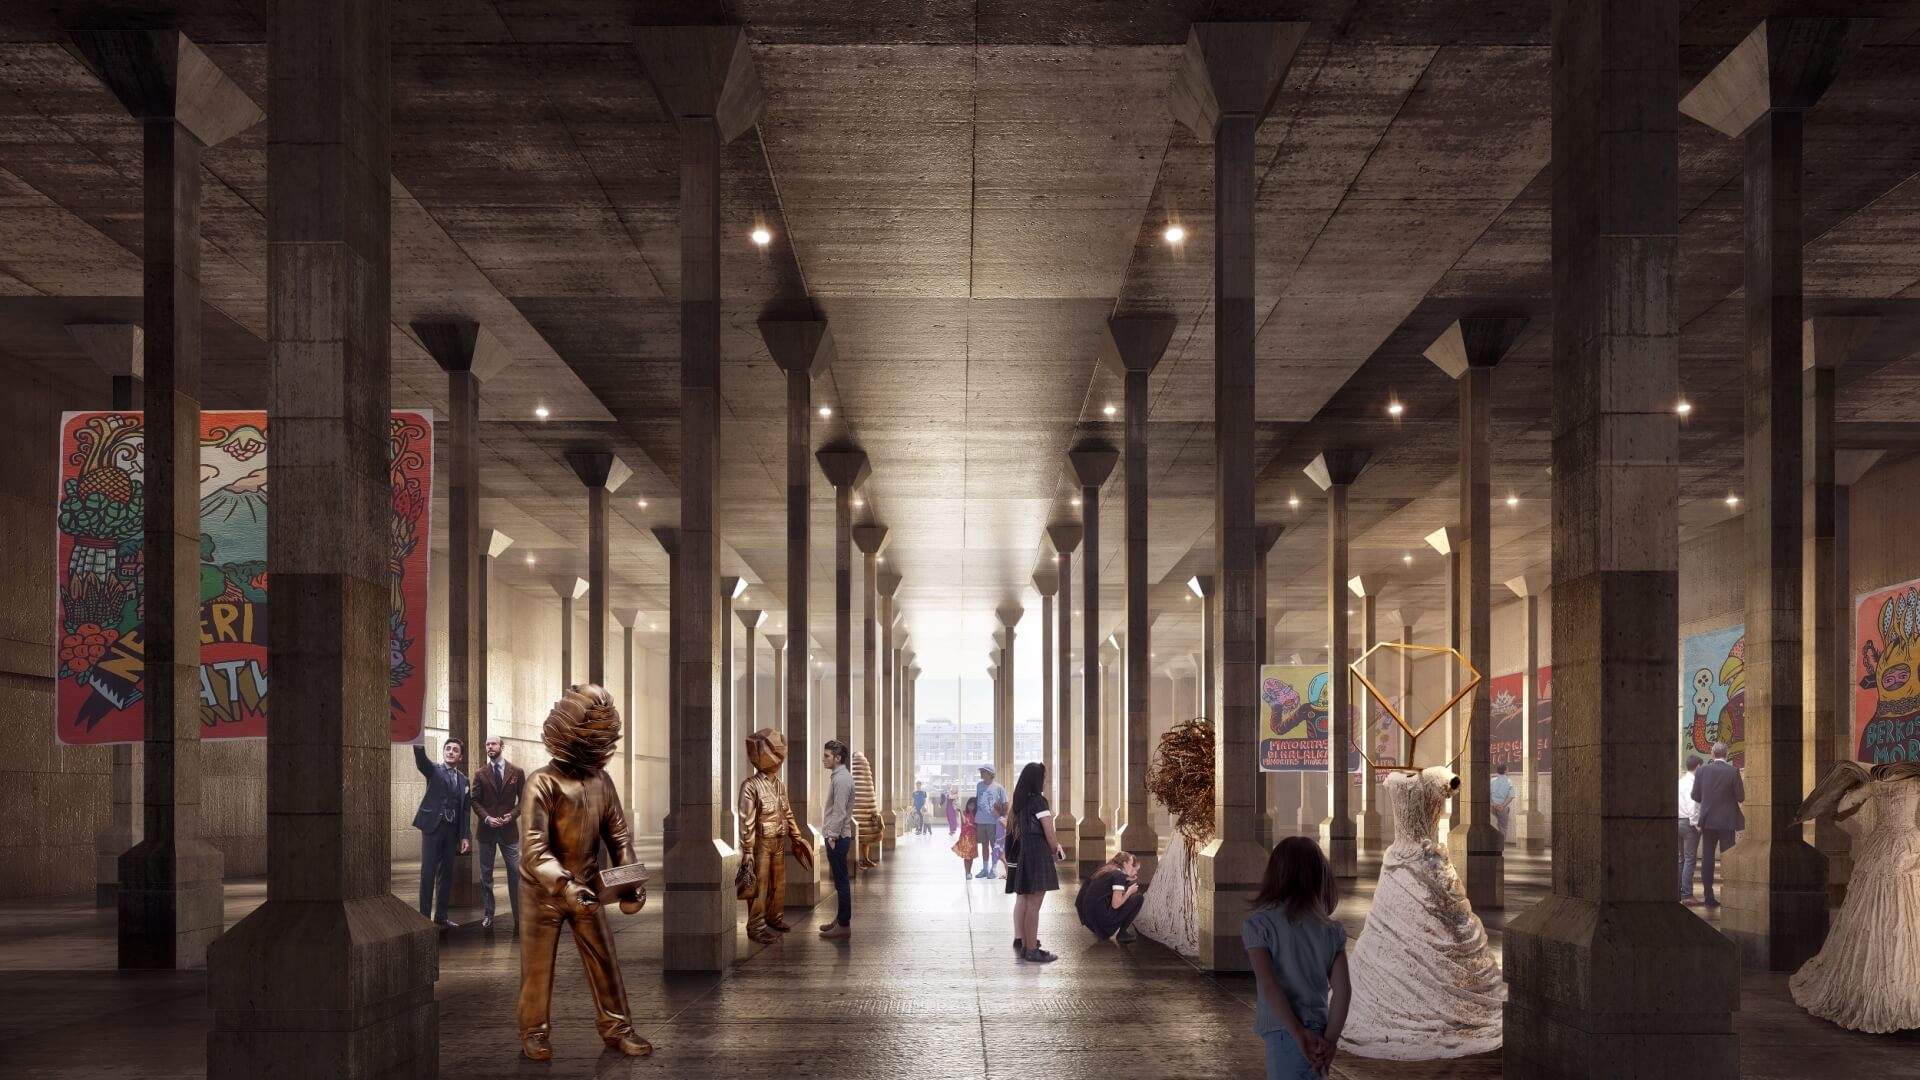 The Art Gallery of New South Wales Is Getting a Massive New $224 Million Extension